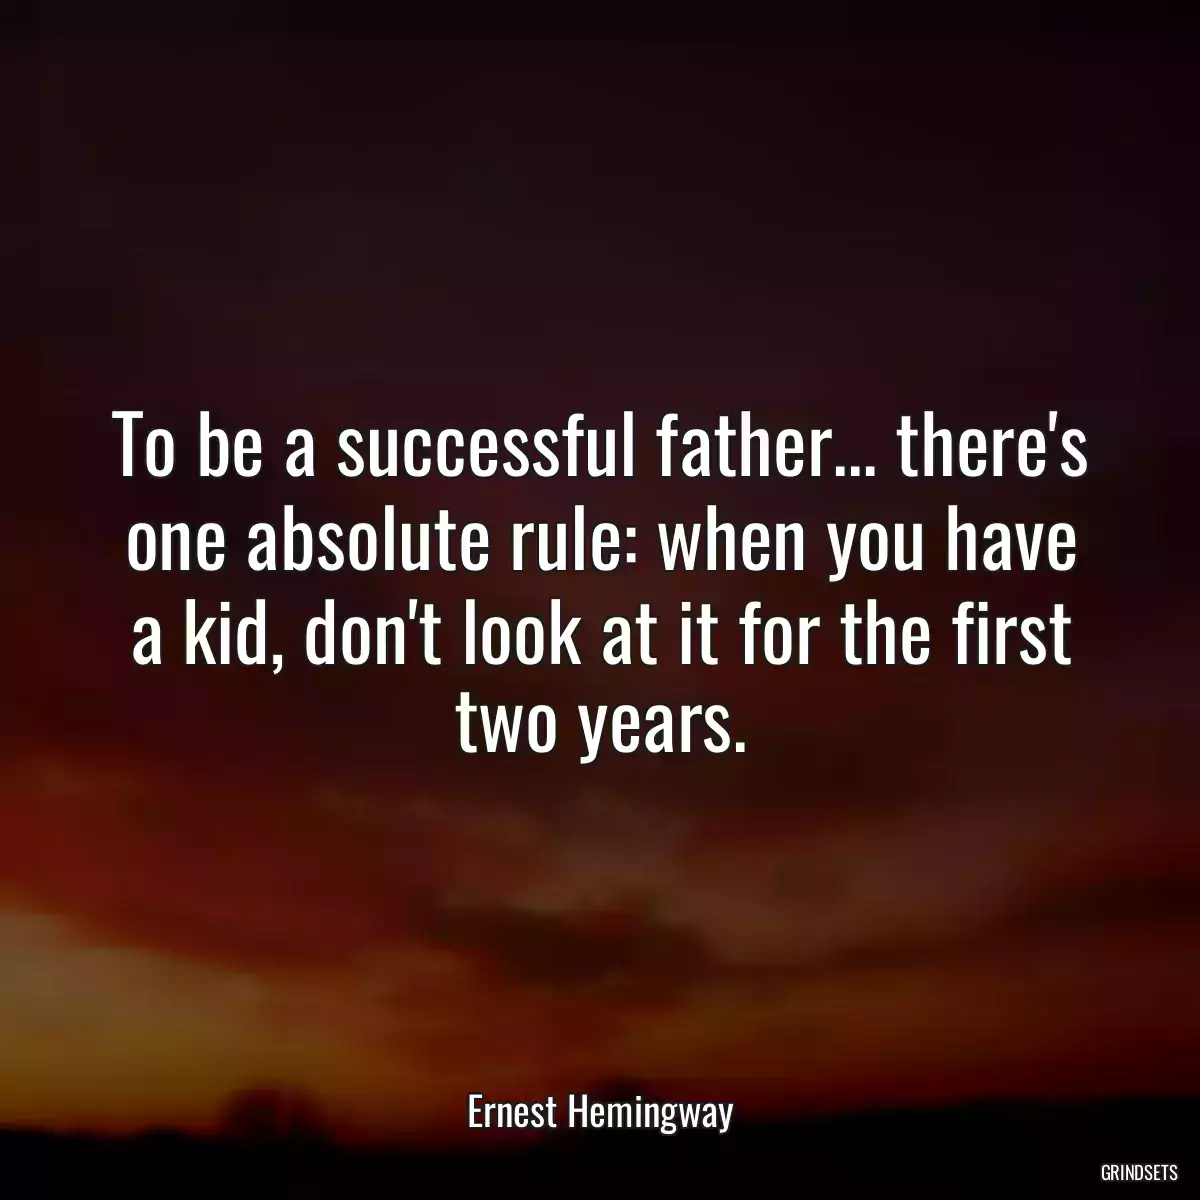 To be a successful father... there\'s one absolute rule: when you have a kid, don\'t look at it for the first two years.